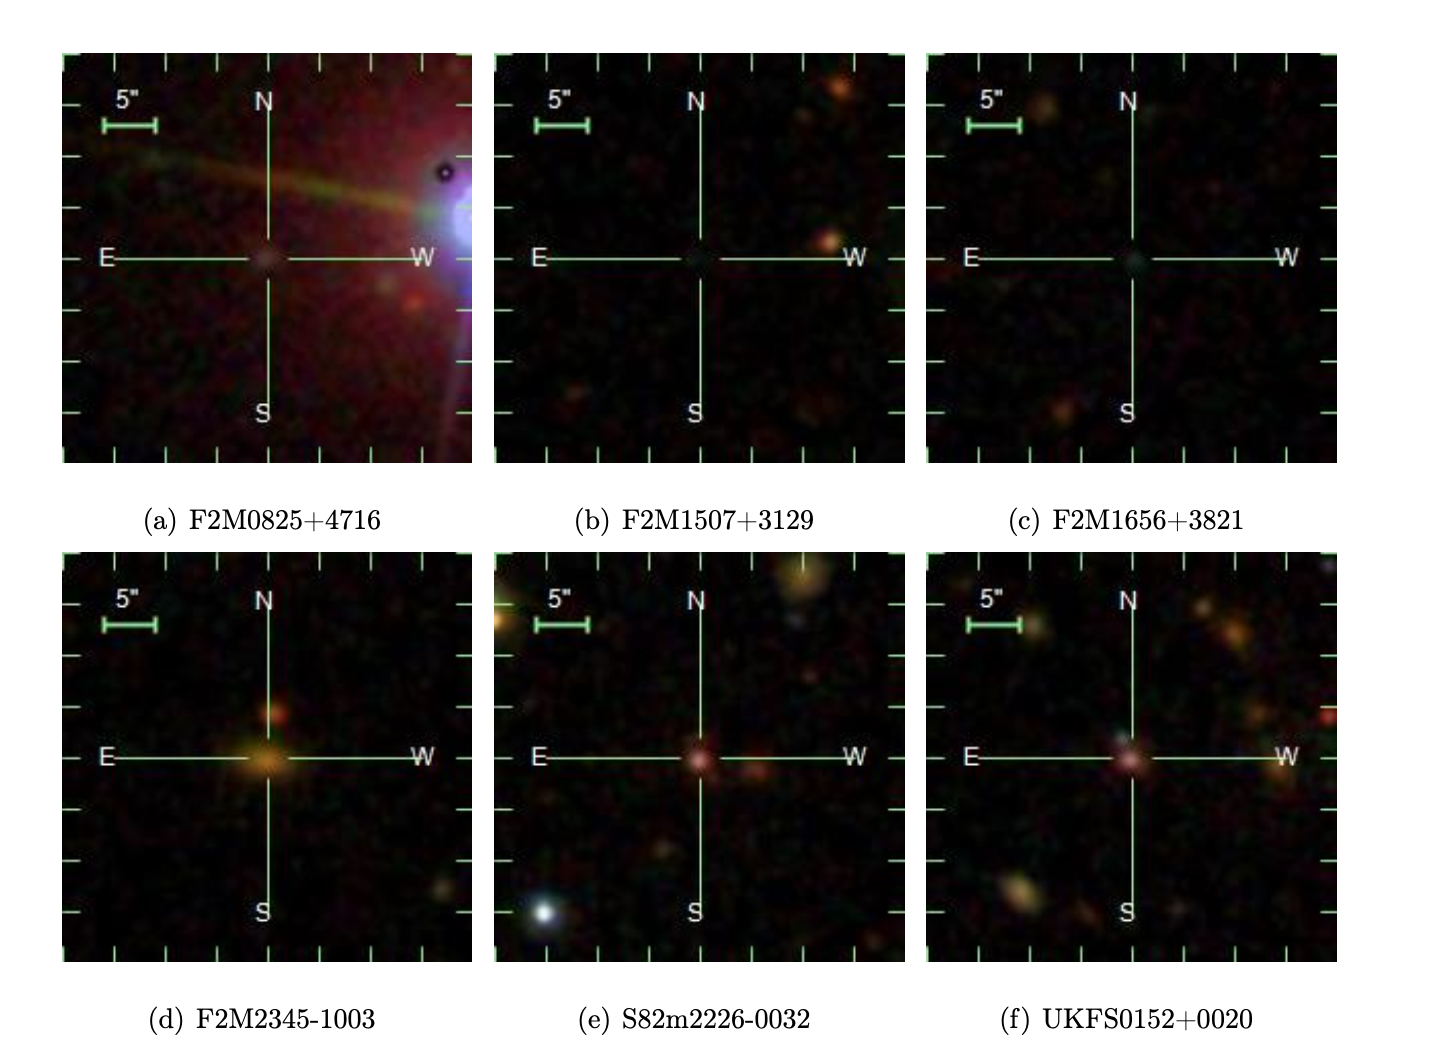 SDSS composites of (a) F2M0825+4716, (b) F2M1507+3129, (c) F2M1656+3821, (d) F2M2345-1003, (e) S82m2226-0032, and (f) UKFS0152+0020 combined from u-, g-, r-, i-, and z-band images.